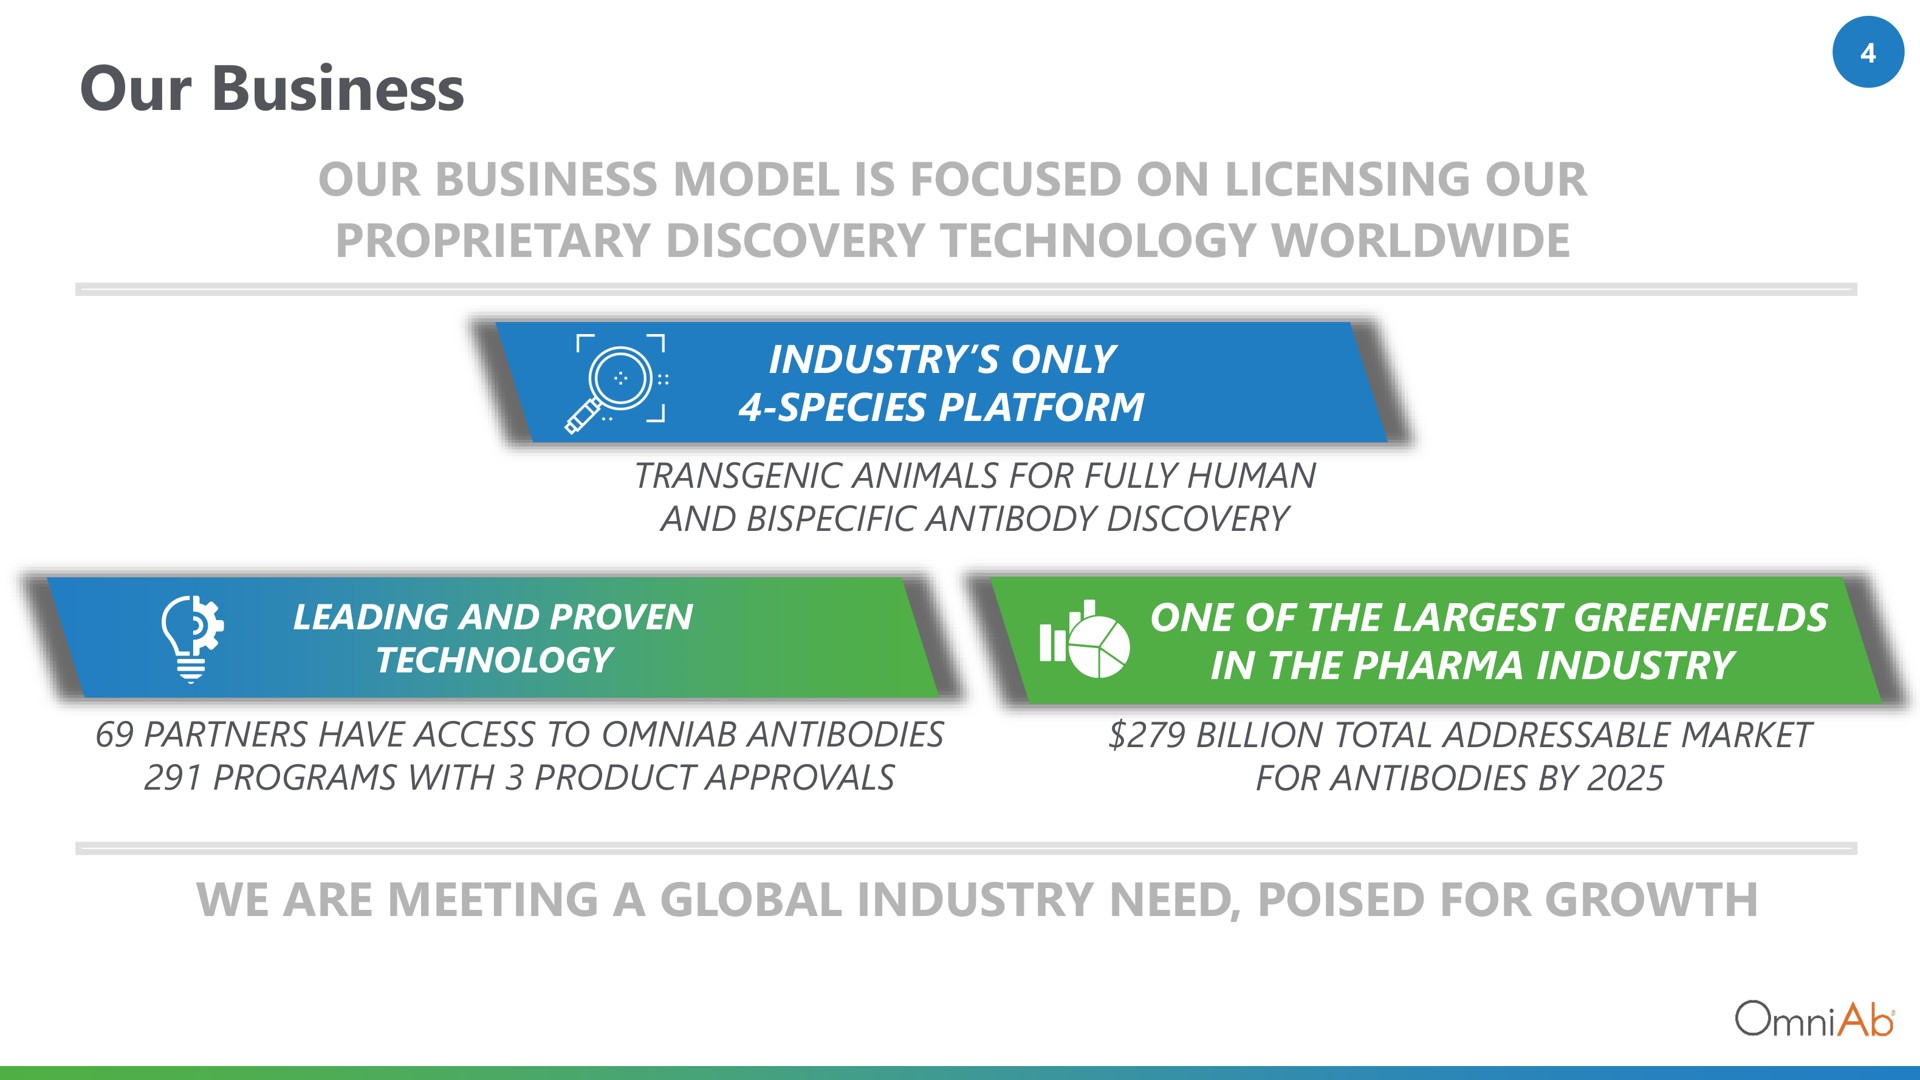 our business our business model is focused on licensing our proprietary discovery technology we are meeting a global industry need poised for growth only species platform pea no partners have access to antibodies programs with product approvals in the billion total market antibodies by | OmniAb